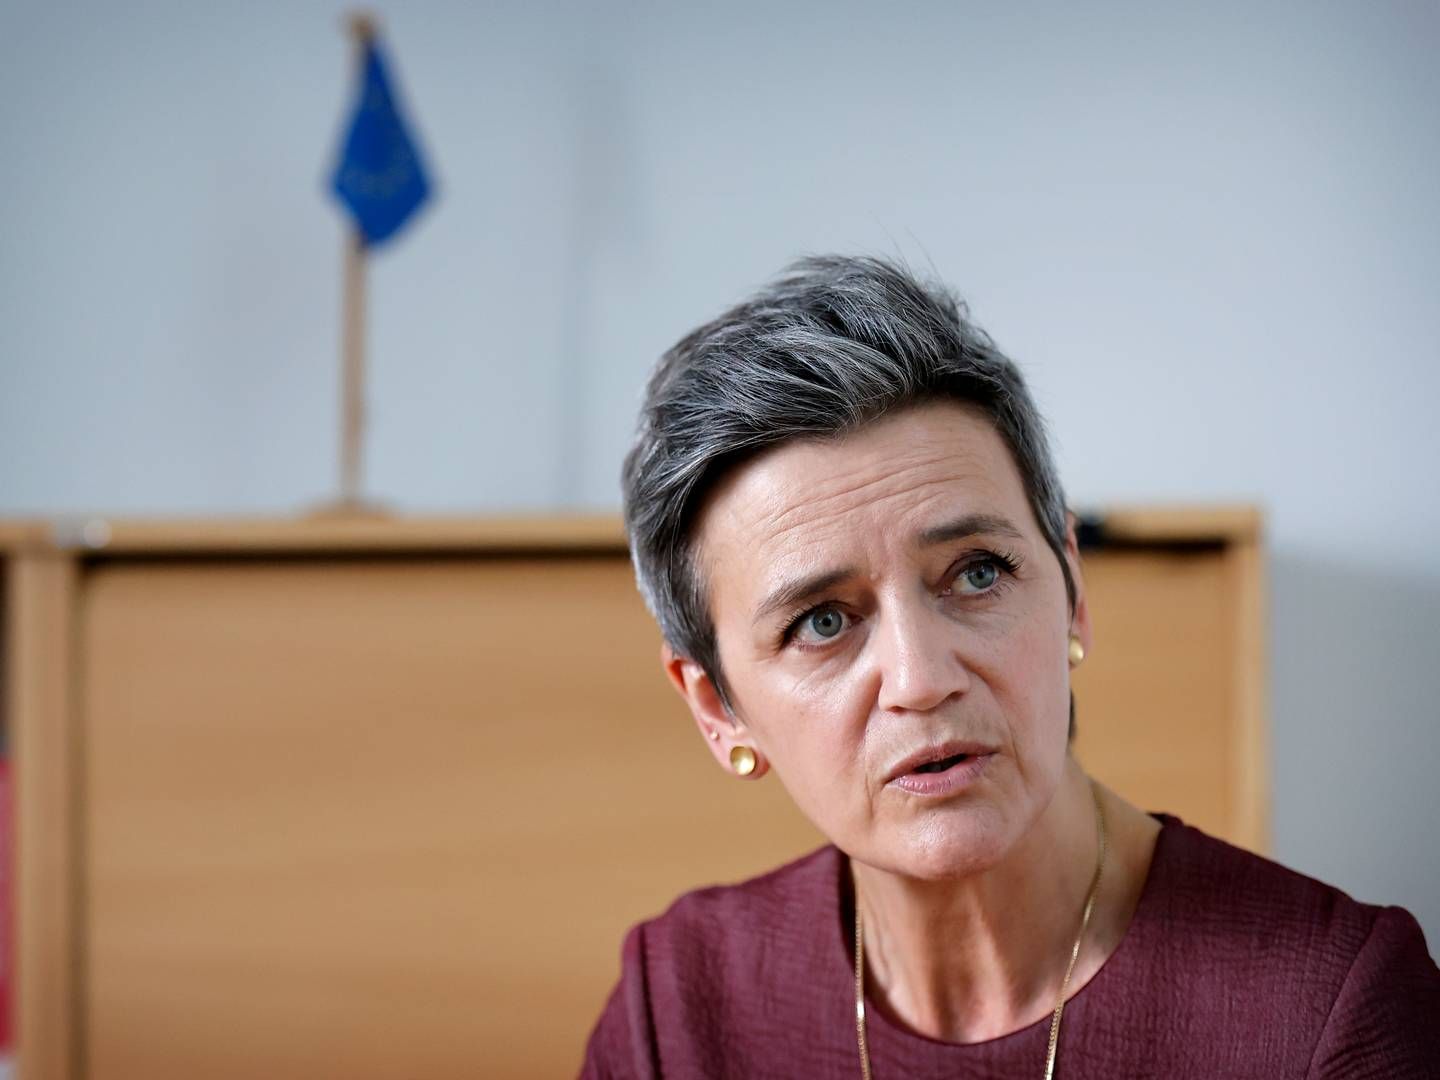 There is a political agreement on artificial intelligence coming to the EU, says European Commissioner for Competition Margrethe Vestager | Foto: Jens Dresling